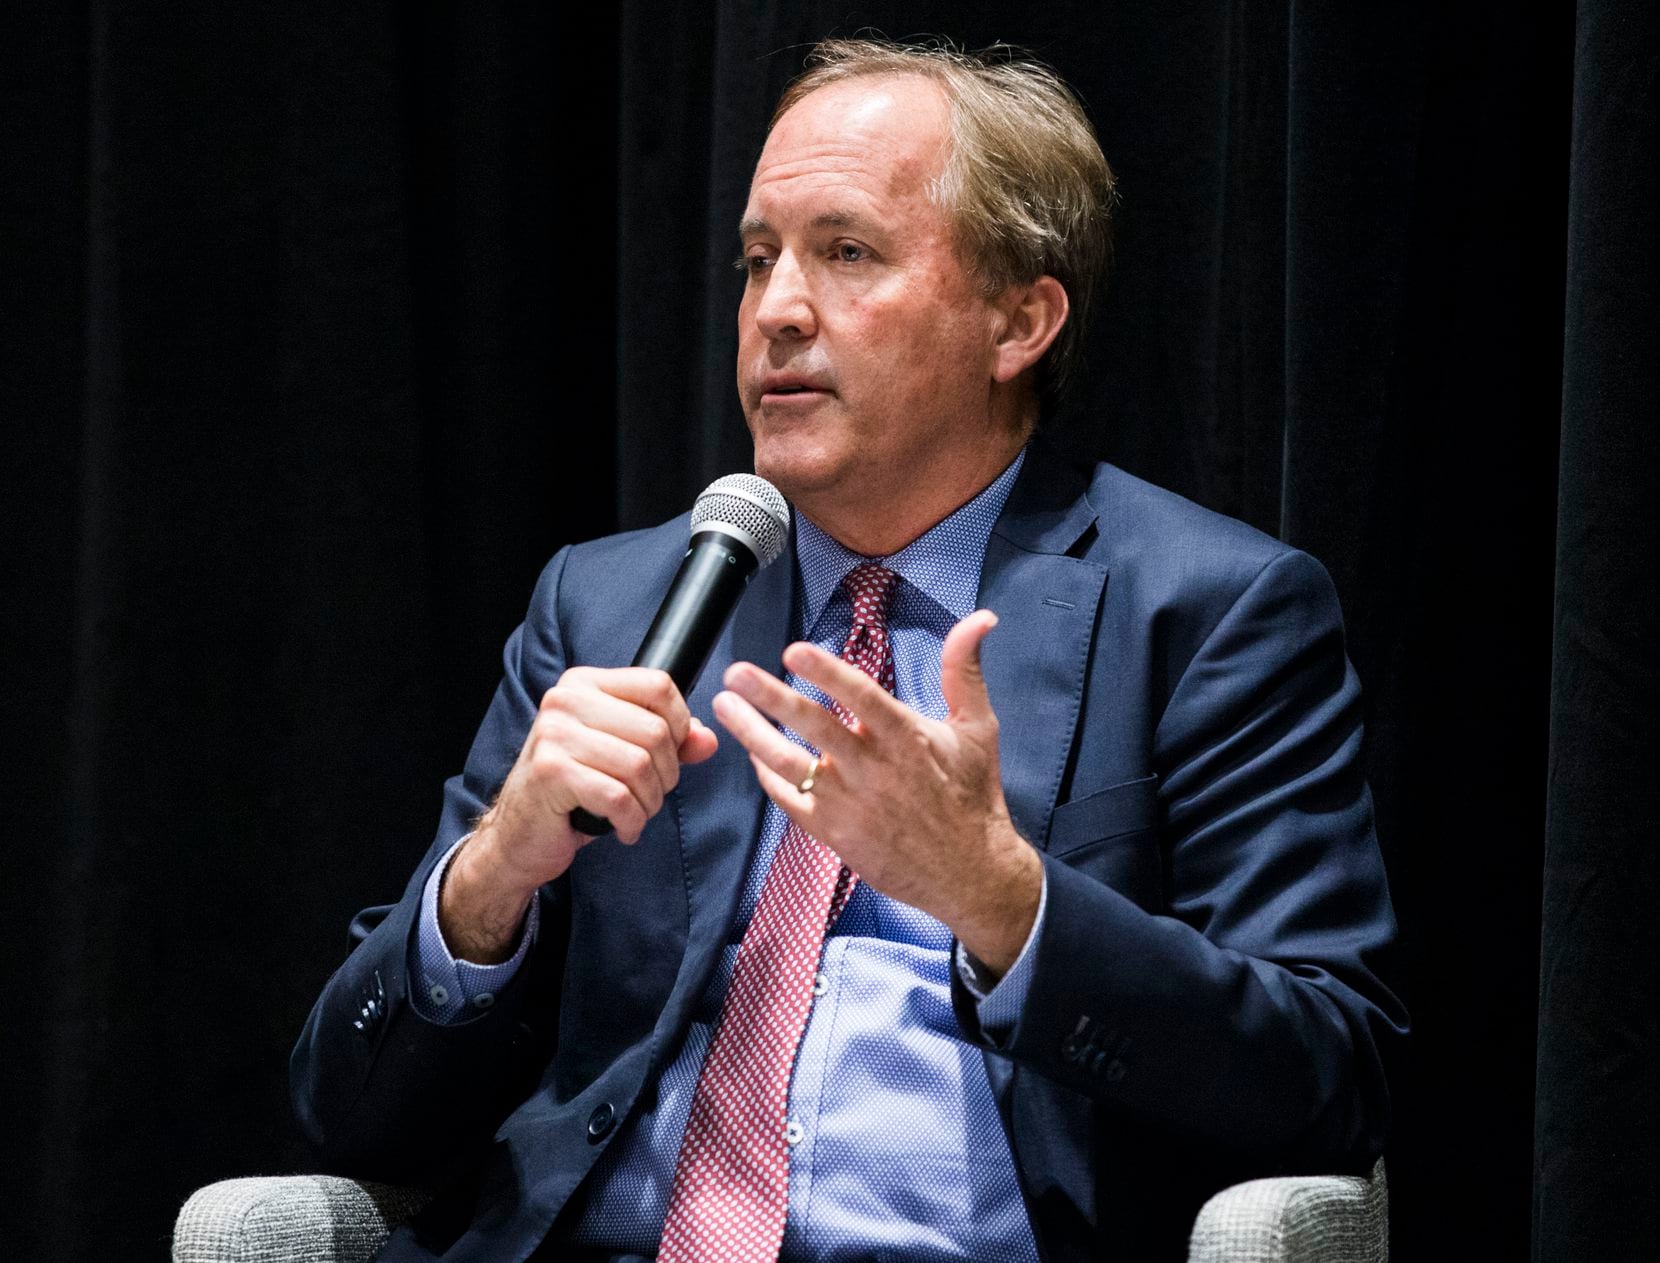 Attorney General Ken Paxton (pictured) discusses changes in the way government is addressing sex trafficking with The Dallas Morning News Vice President and Editor of Editorials Brandan Miniter, U.S. Attorney Erin Newly Cox, and Trafficking Institute CEO Victor Boutros on Wednesday, February 26, 2020 at The Dallas Morning News Auditorium in Dallas. (Ashley Landis/The Dallas Morning News)